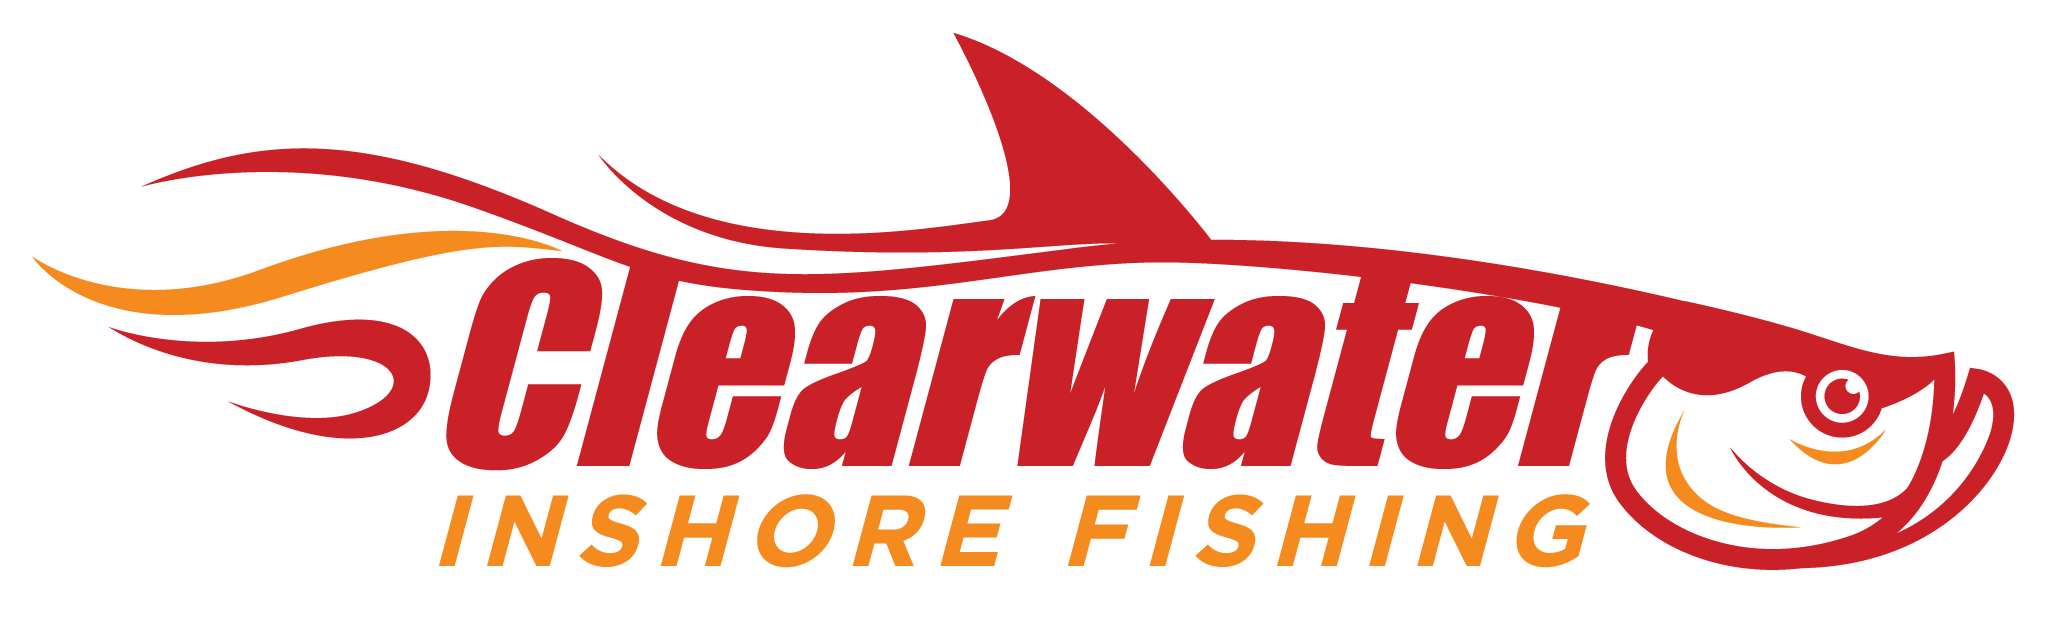 Clearwater Inshore Fishing Report for June